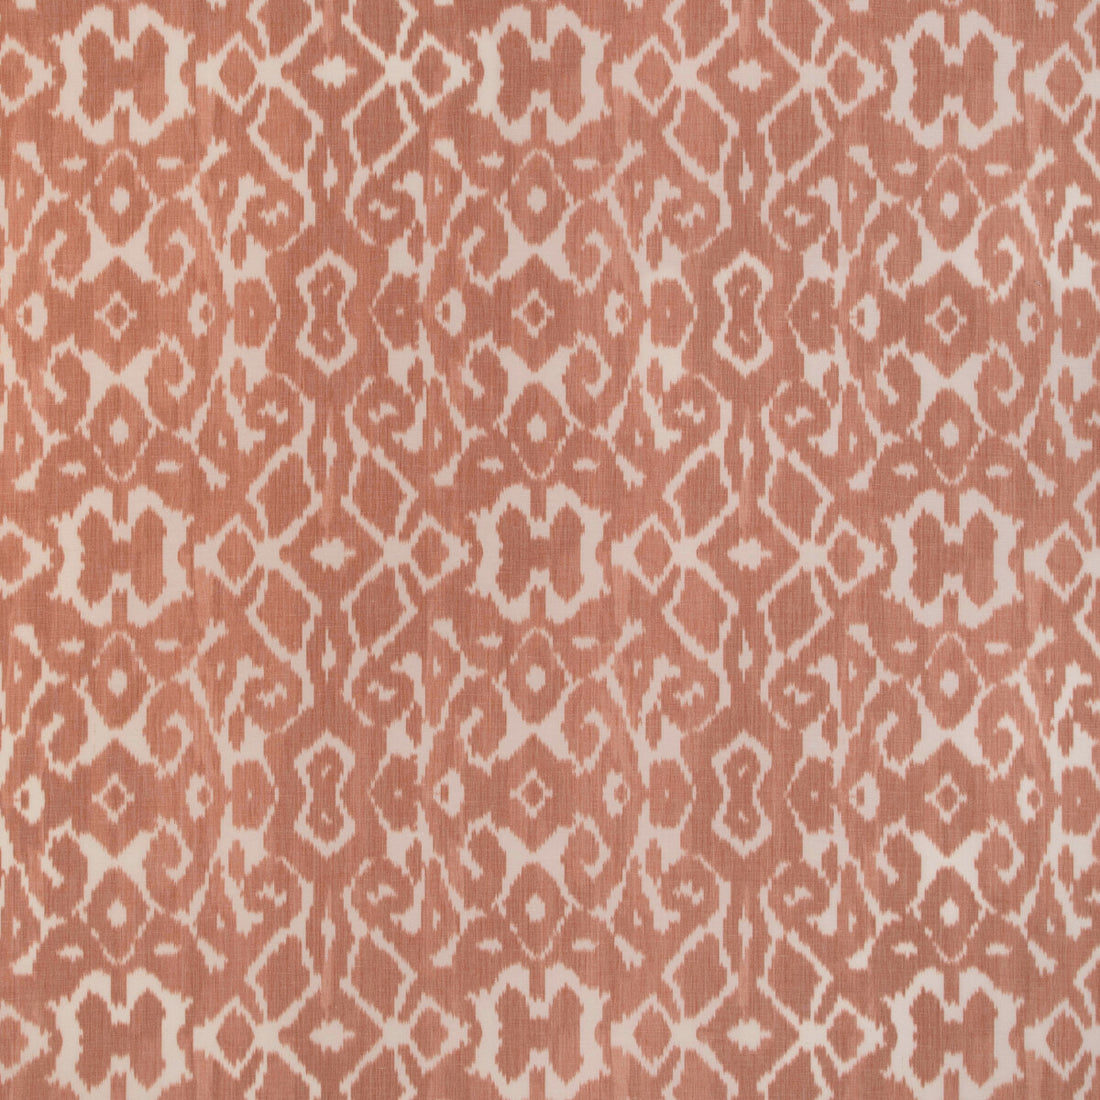 Toponas Print fabric in spice color - pattern 2020206.12.0 - by Lee Jofa in the Clare Prints collection